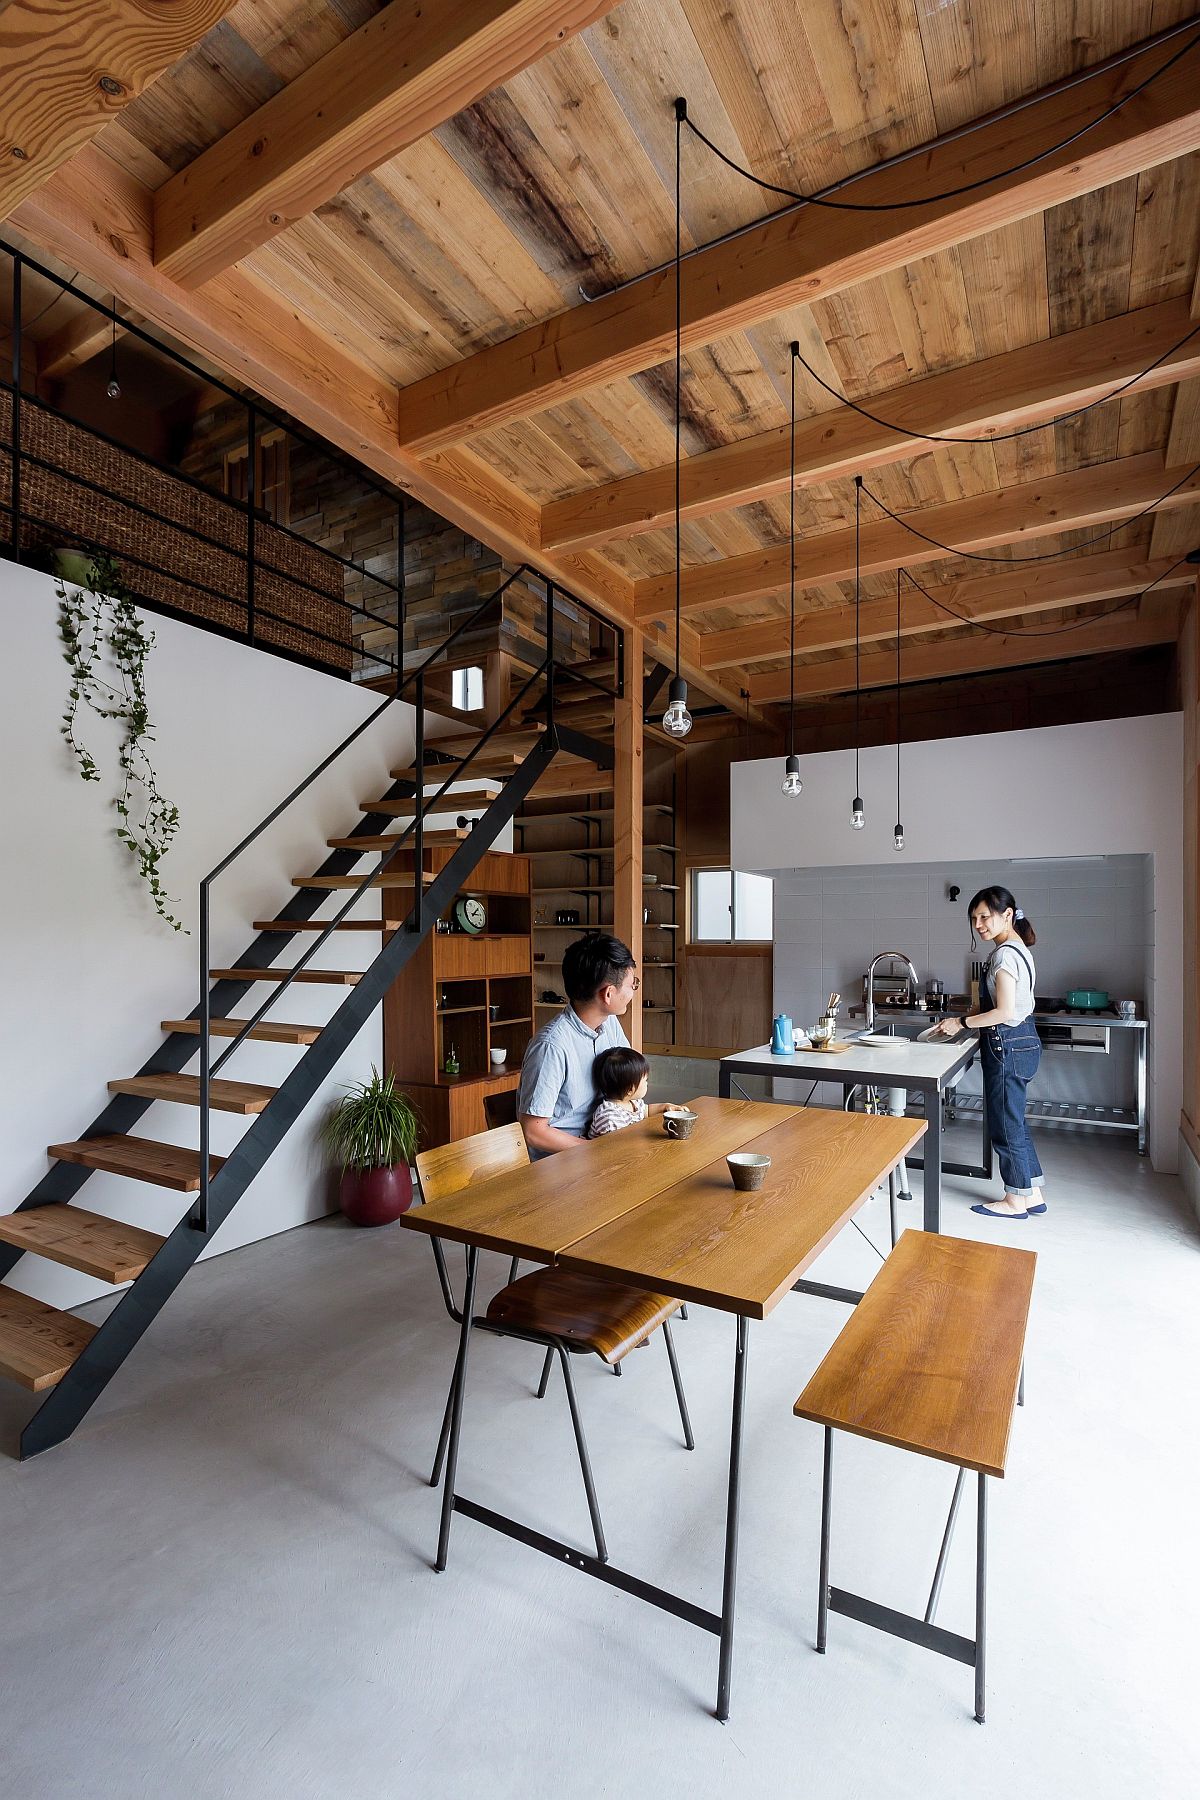 Interior of the newly built Japanese home inspired by renovated warehouse look